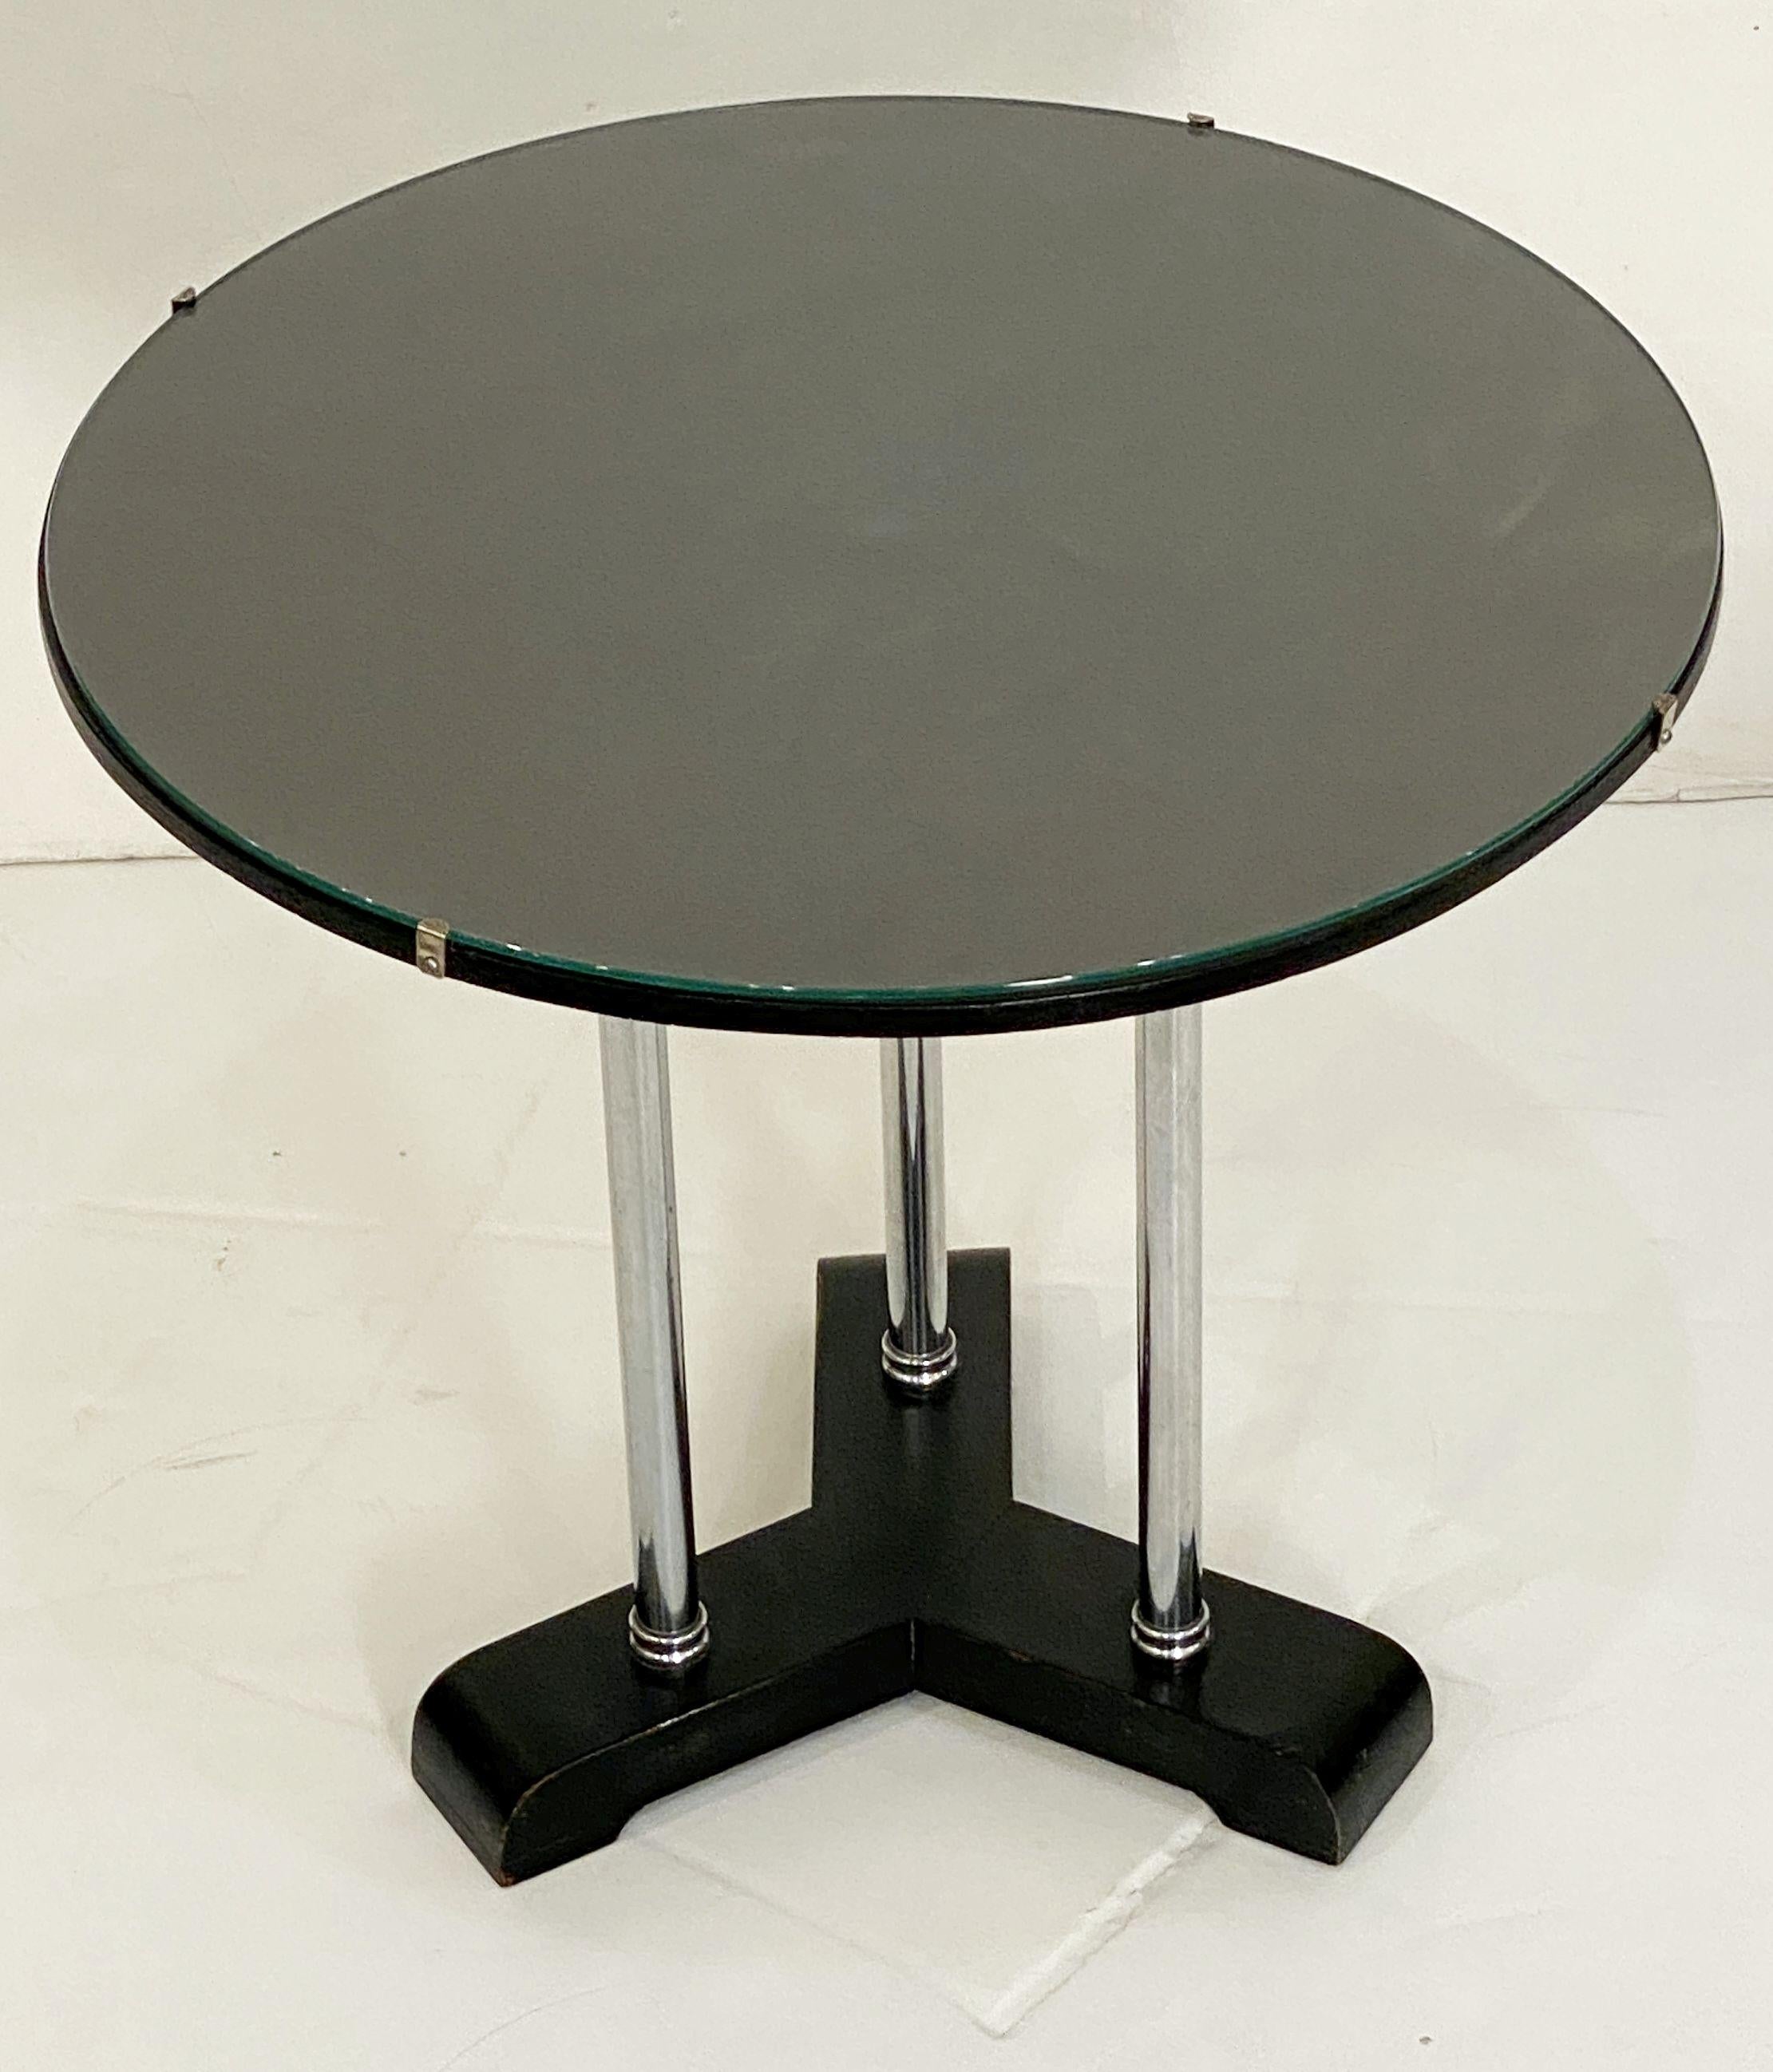 English Art Deco Round Drinks Tripod Table of Chrome, Ebonized Wood, and Glass For Sale 5